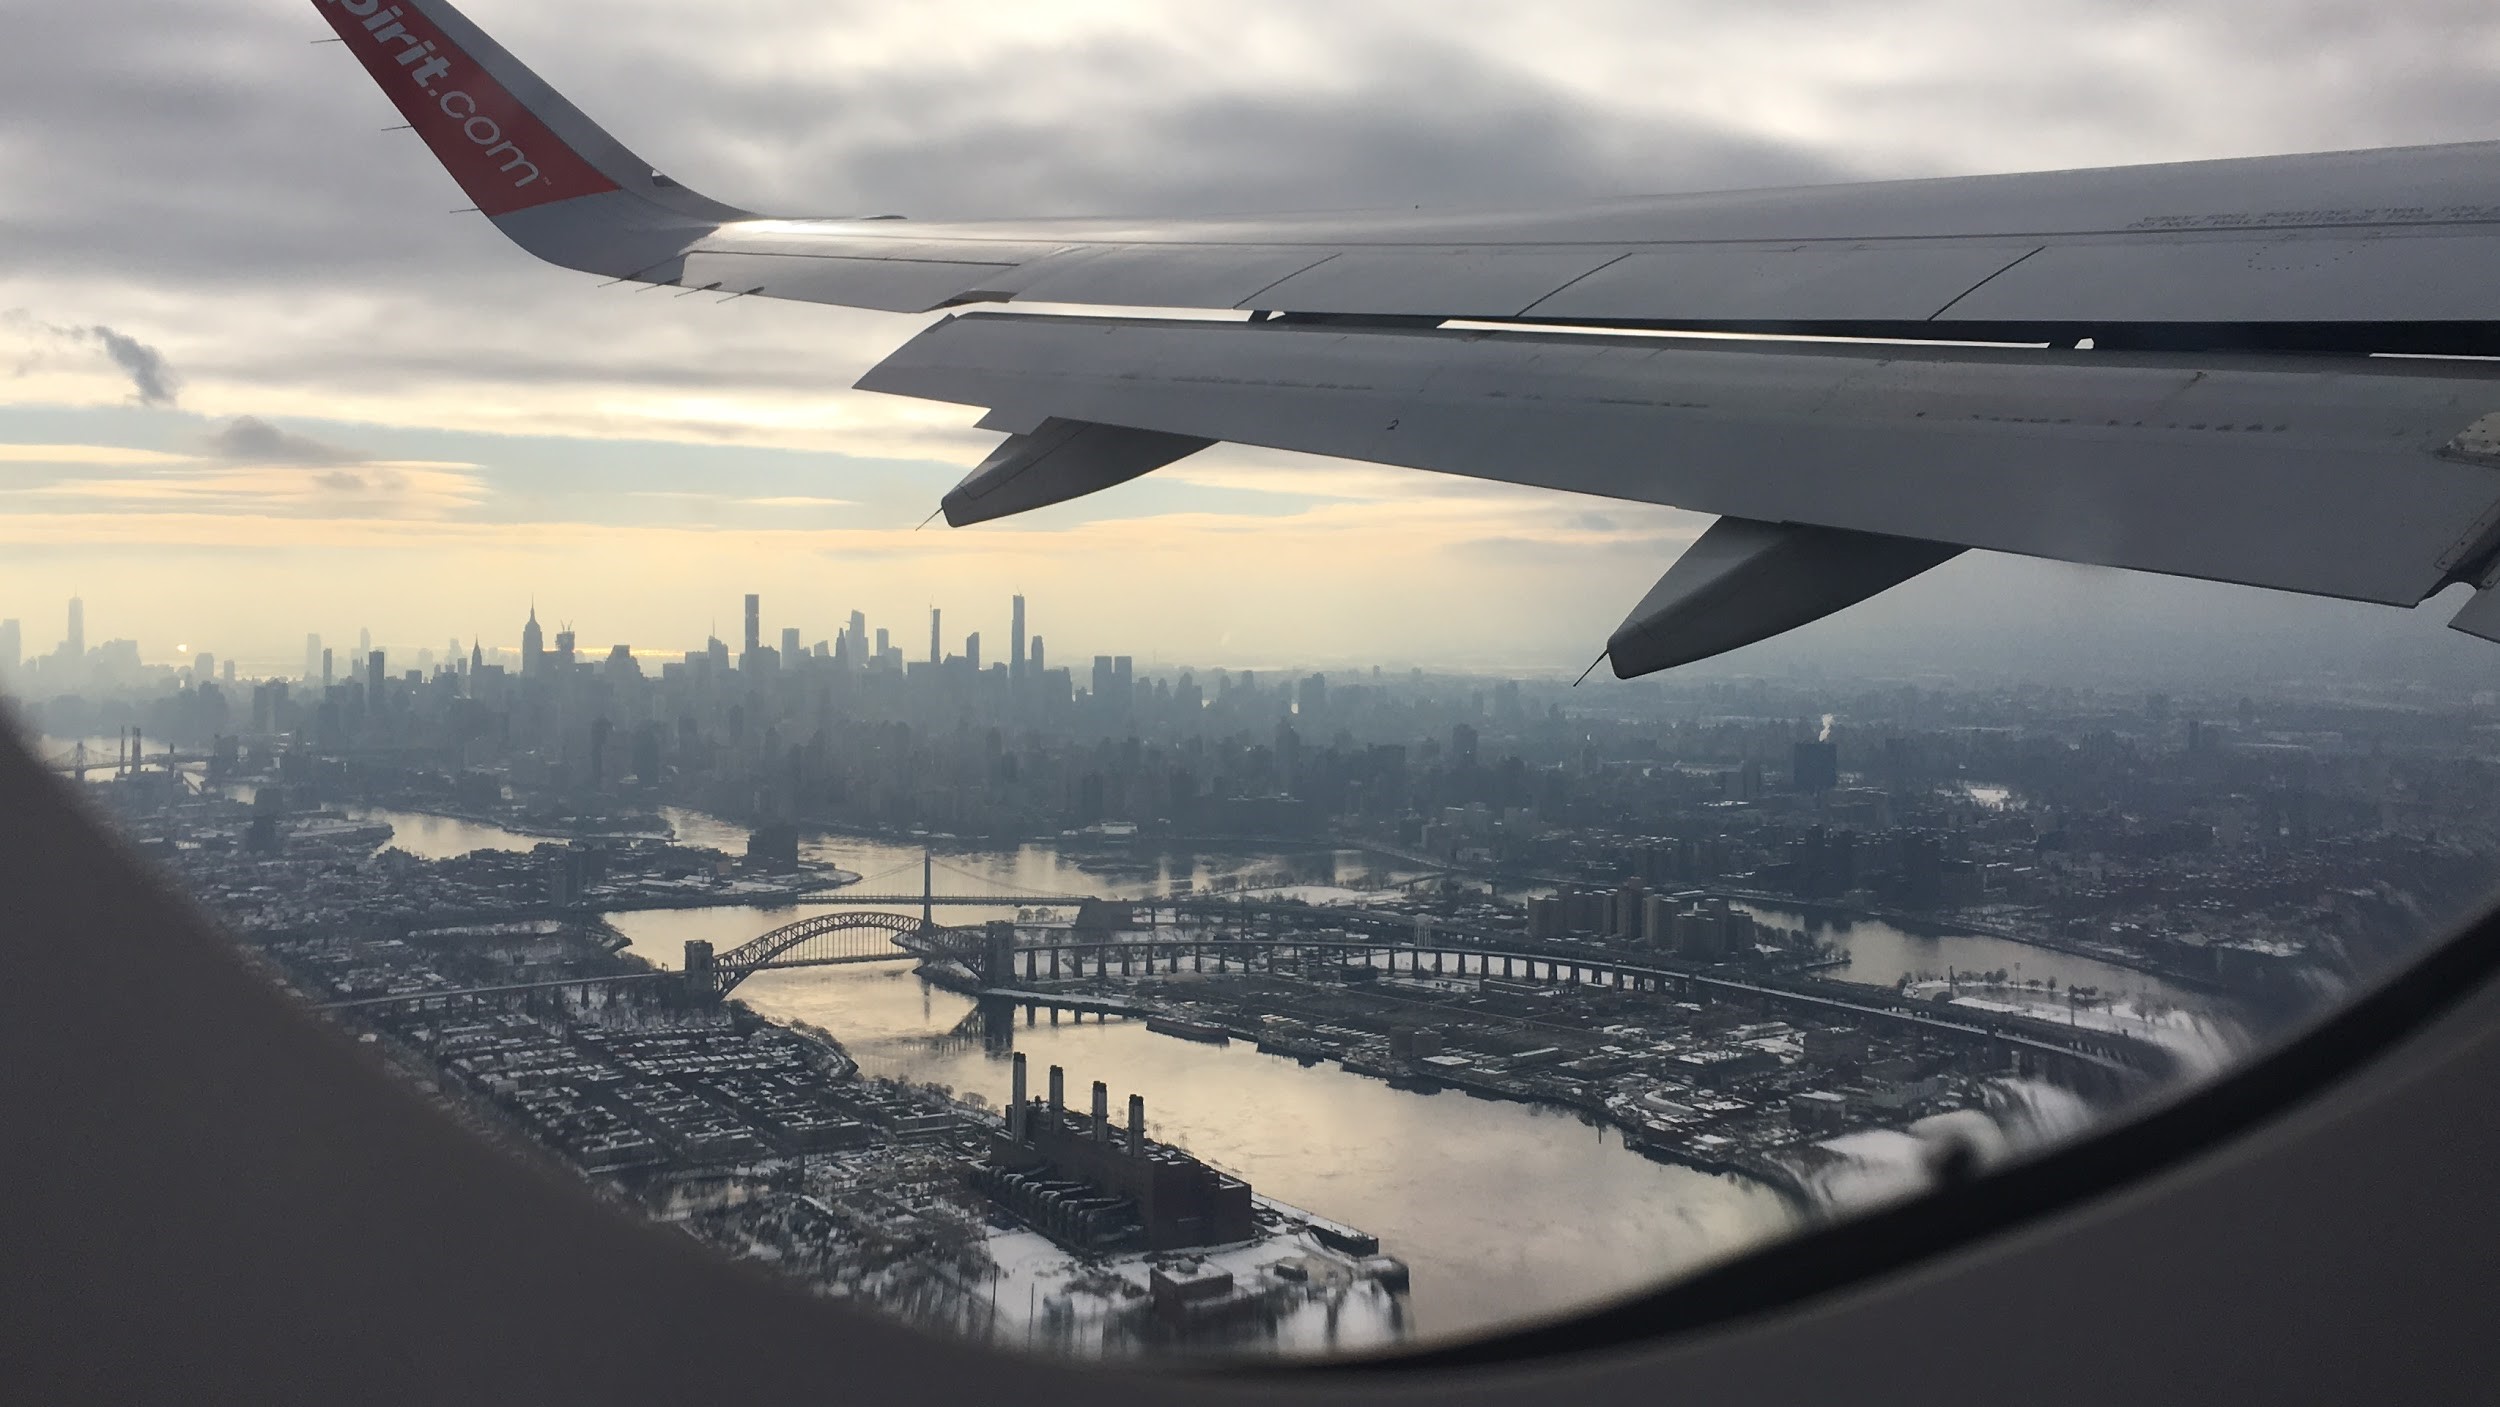 The view of New York City from an airplane